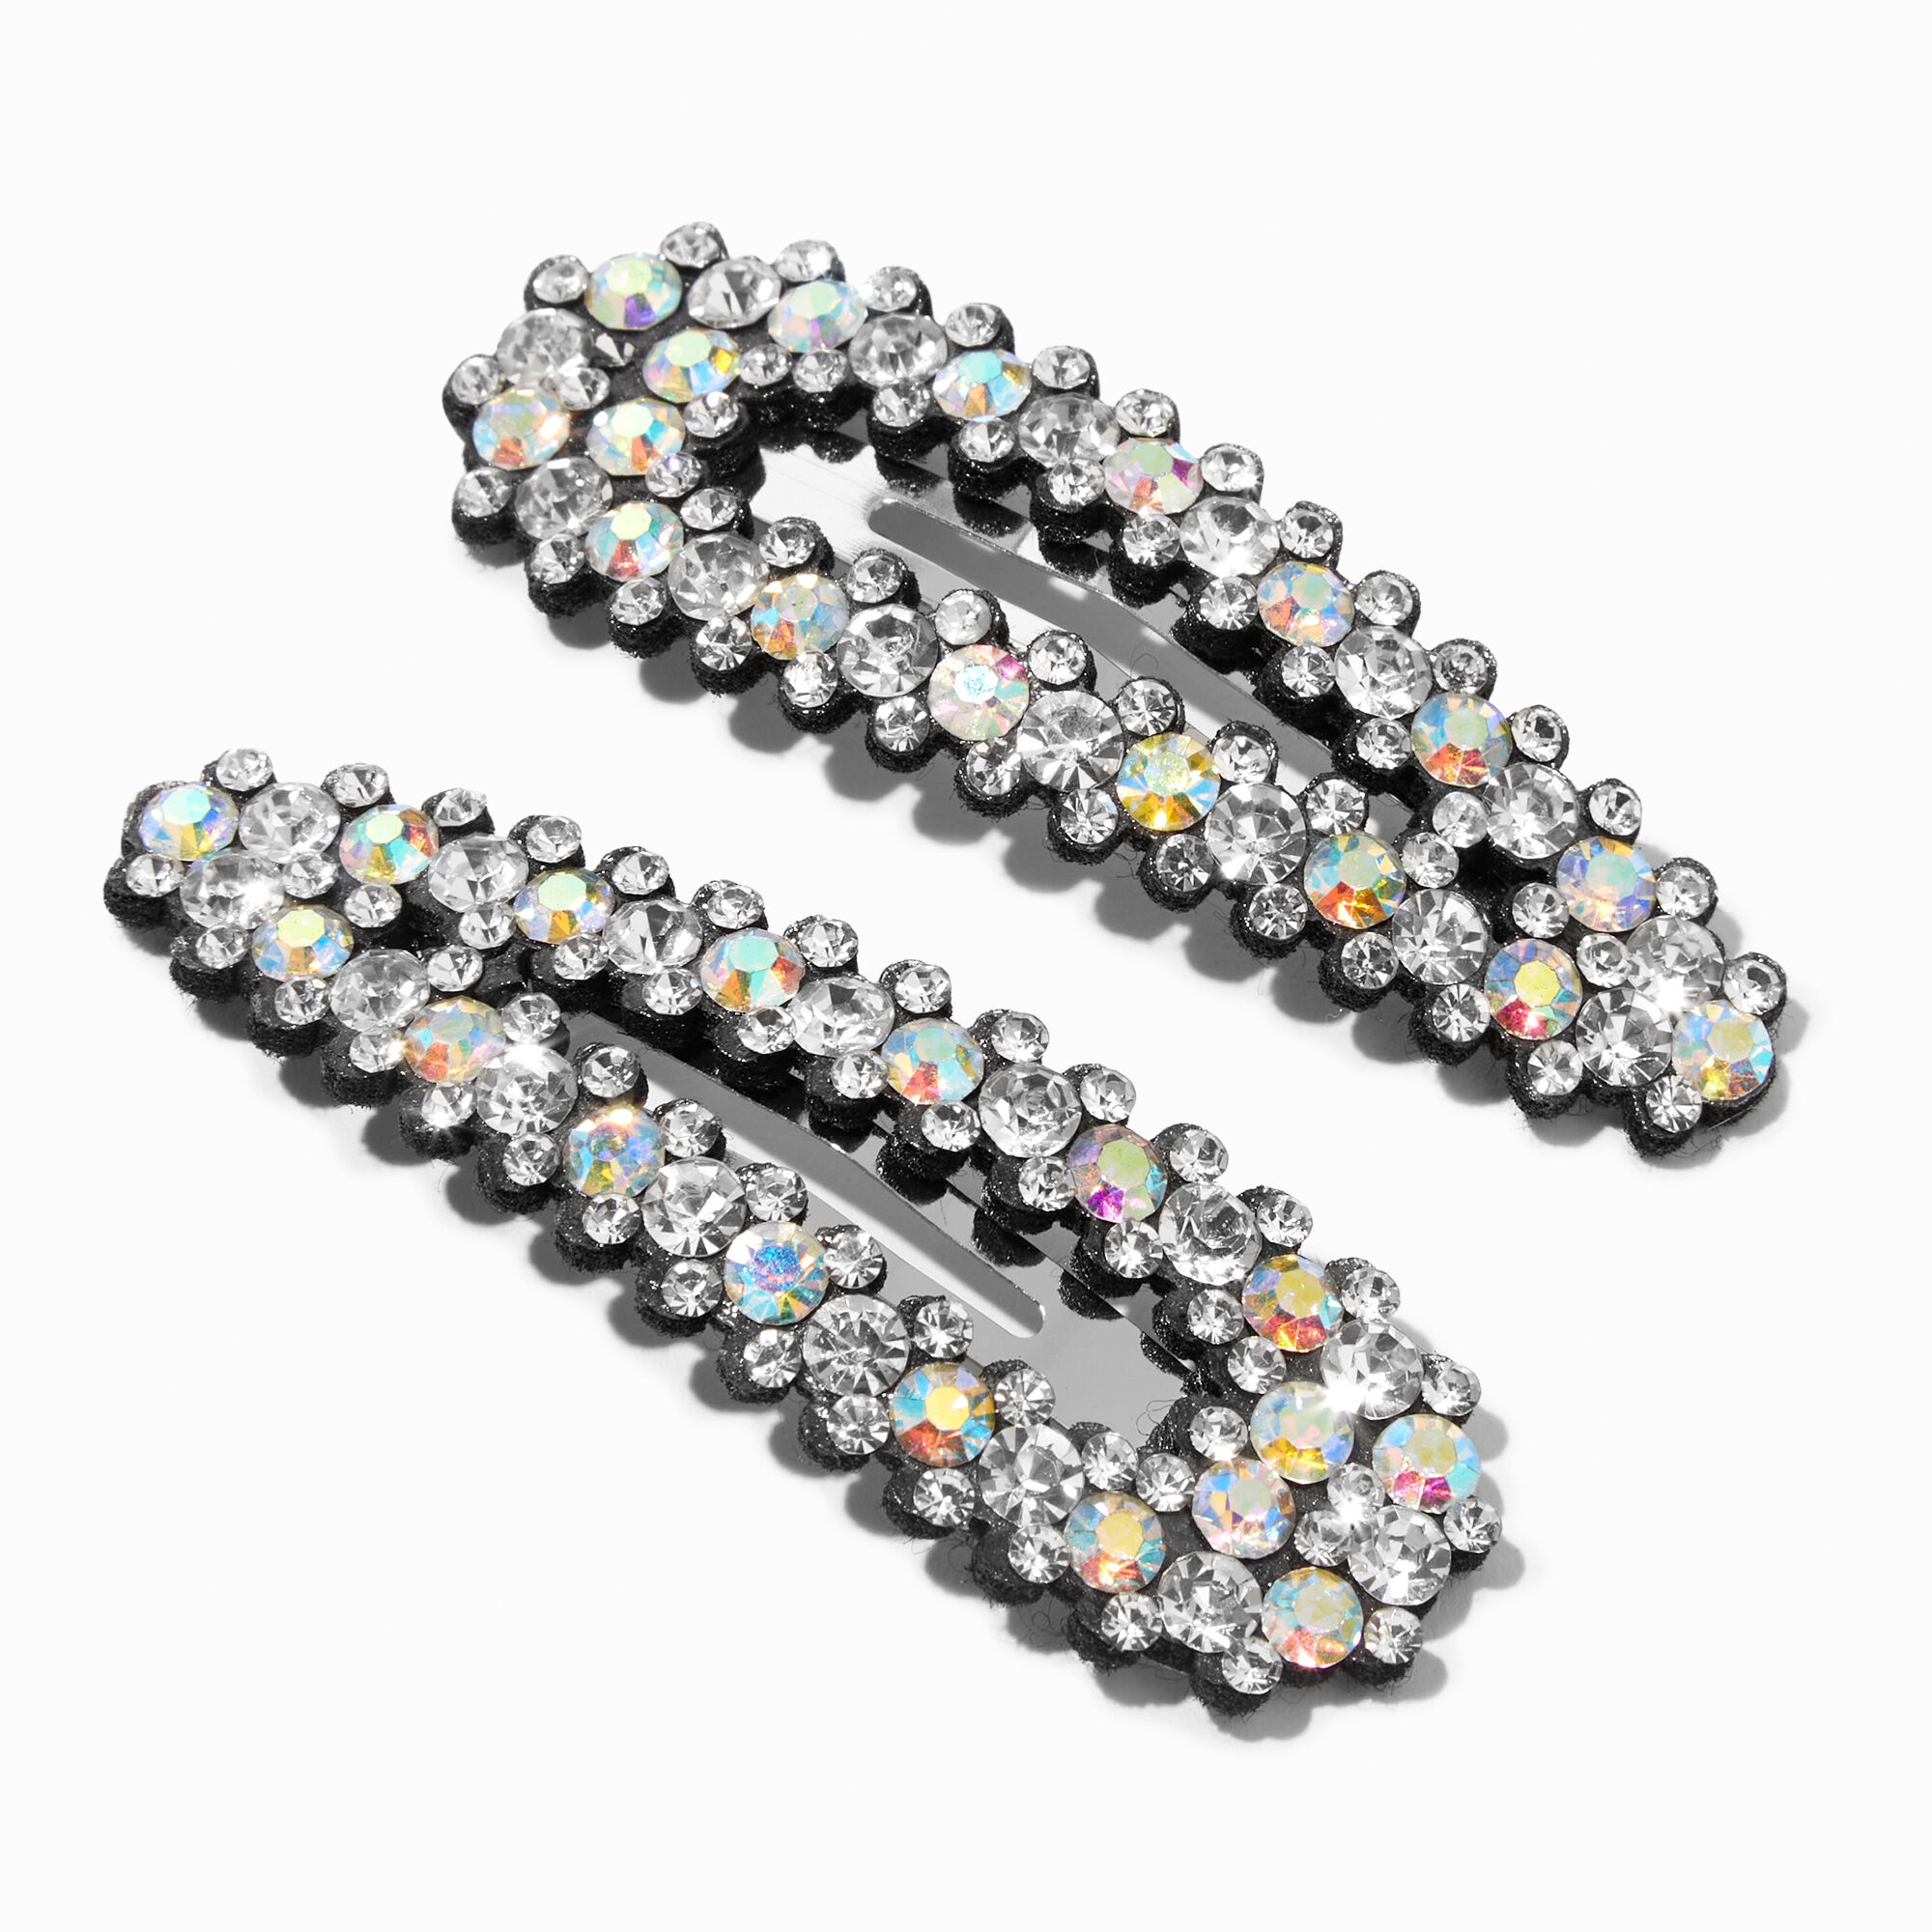 View Claires Crystal Hair Snap Clips 2 Pack information